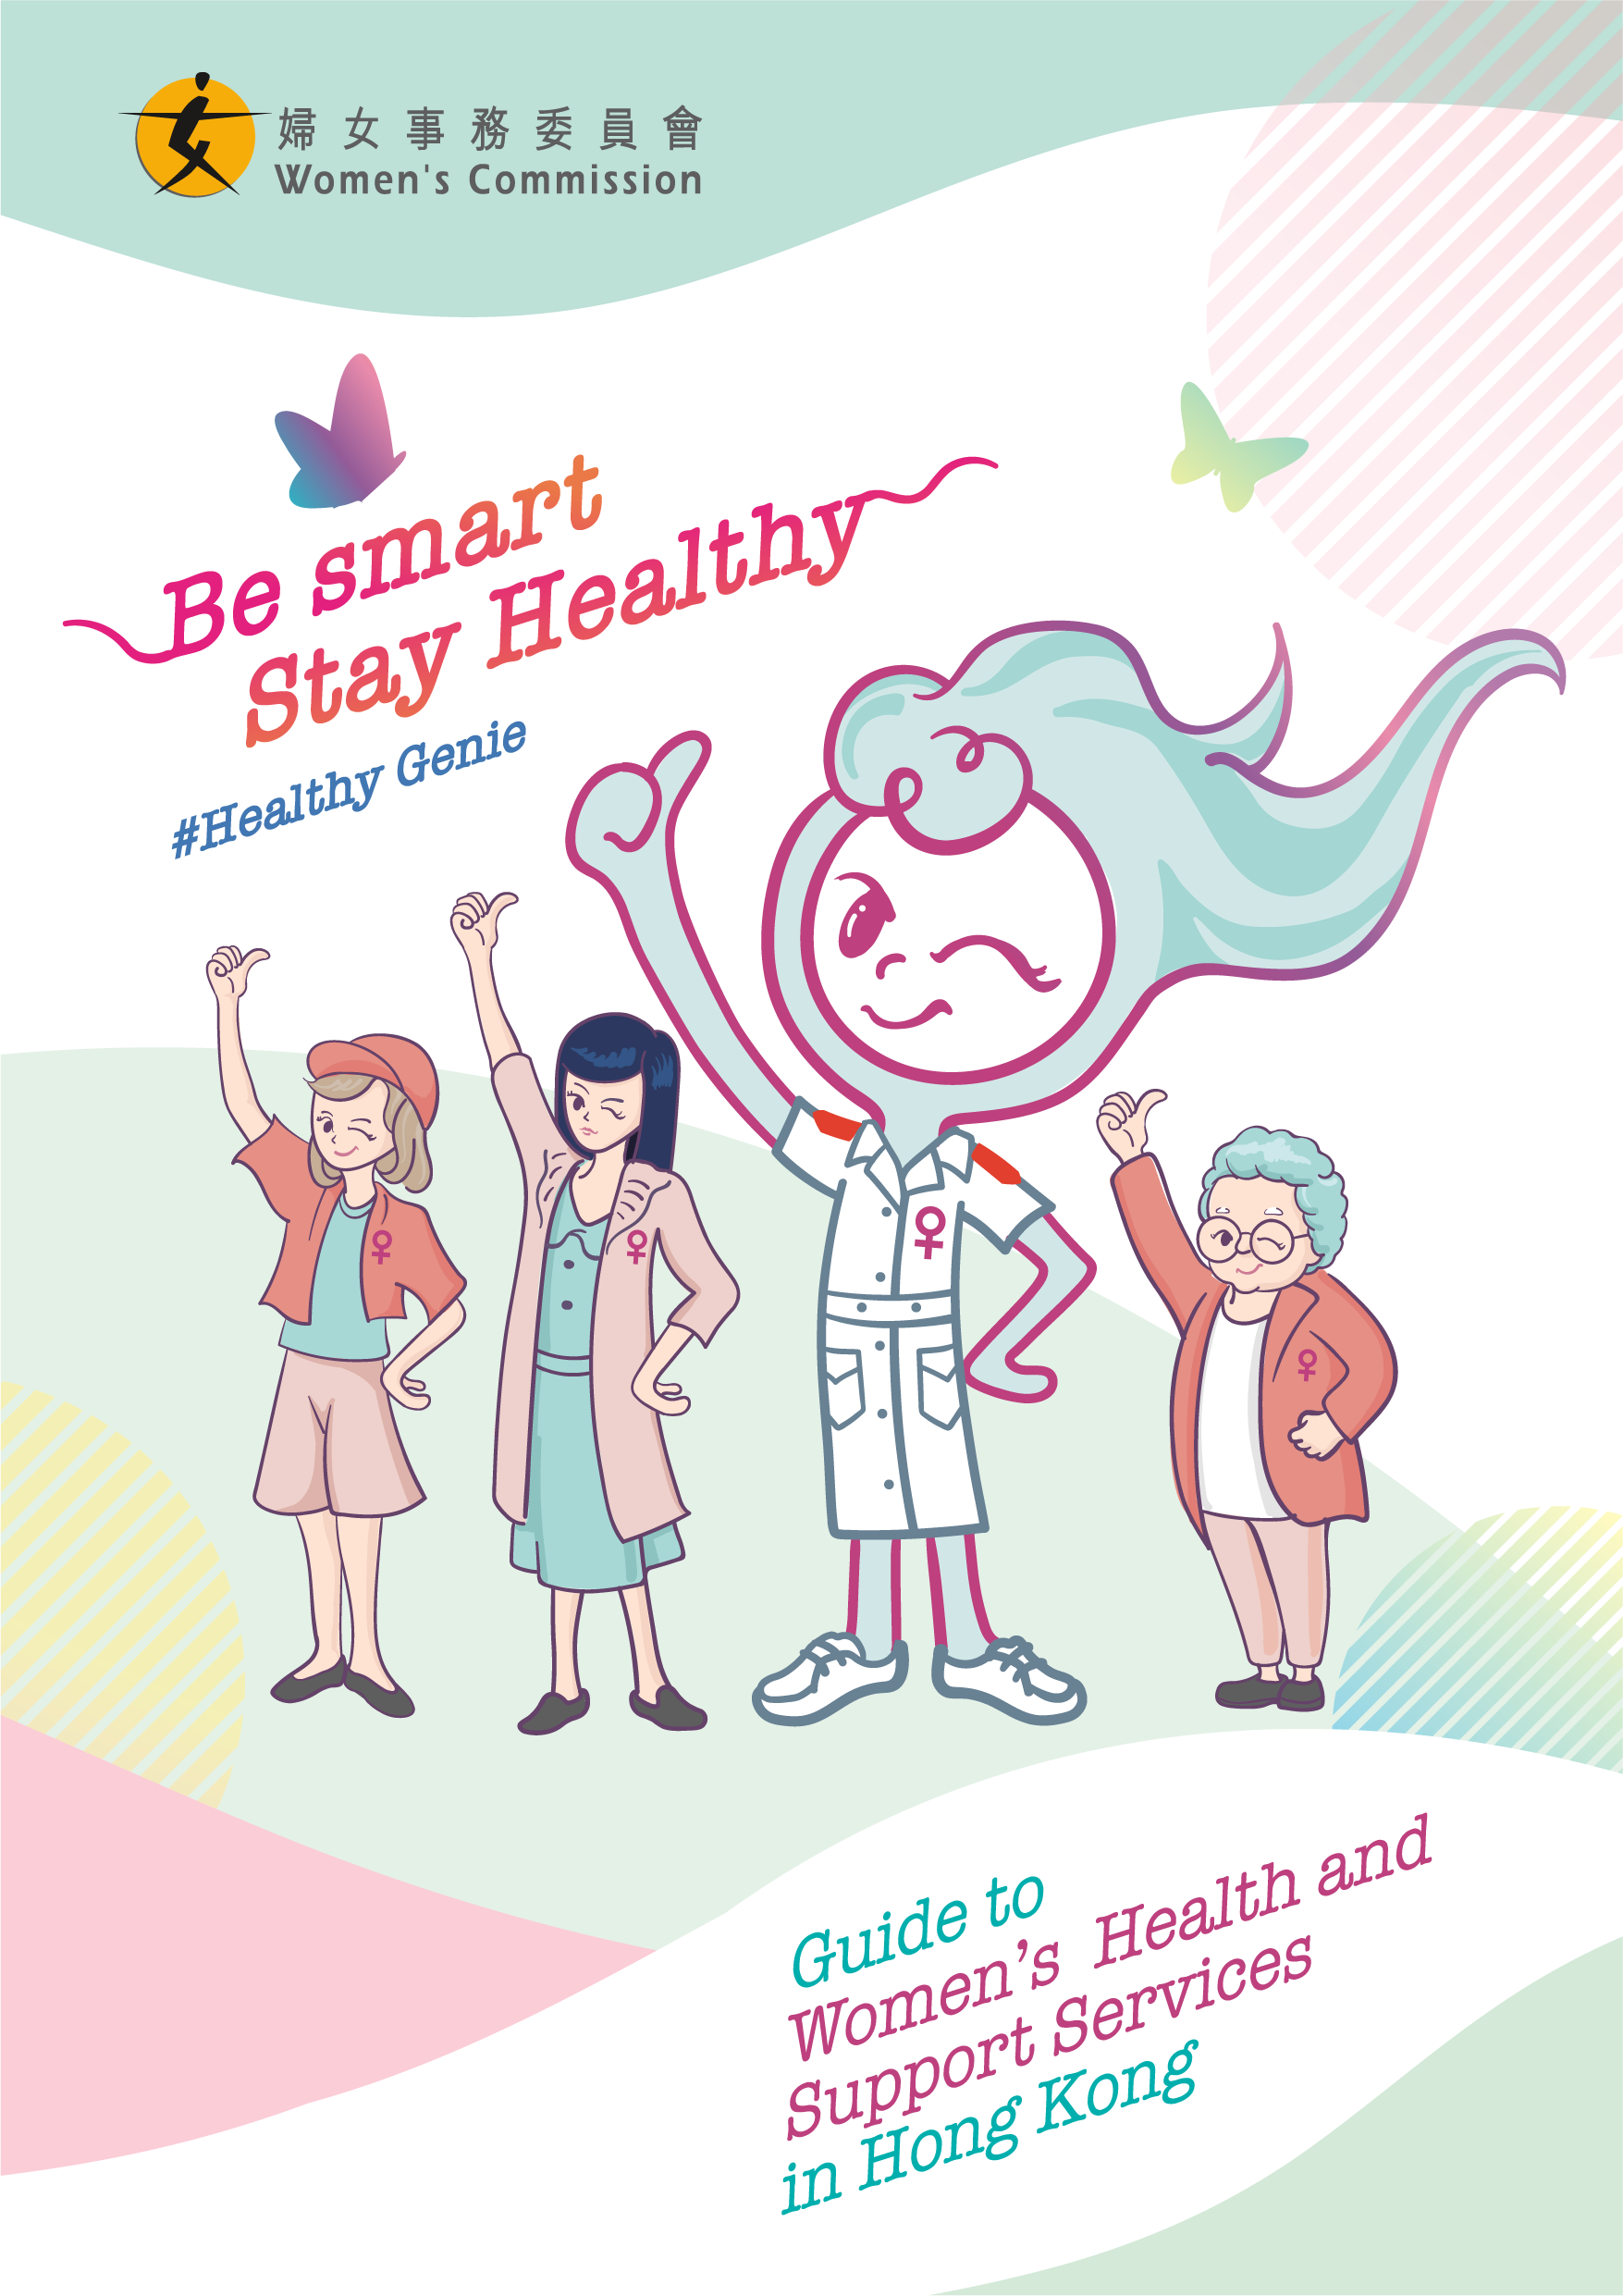 Guide to Women’s Health Services in Hong Kong